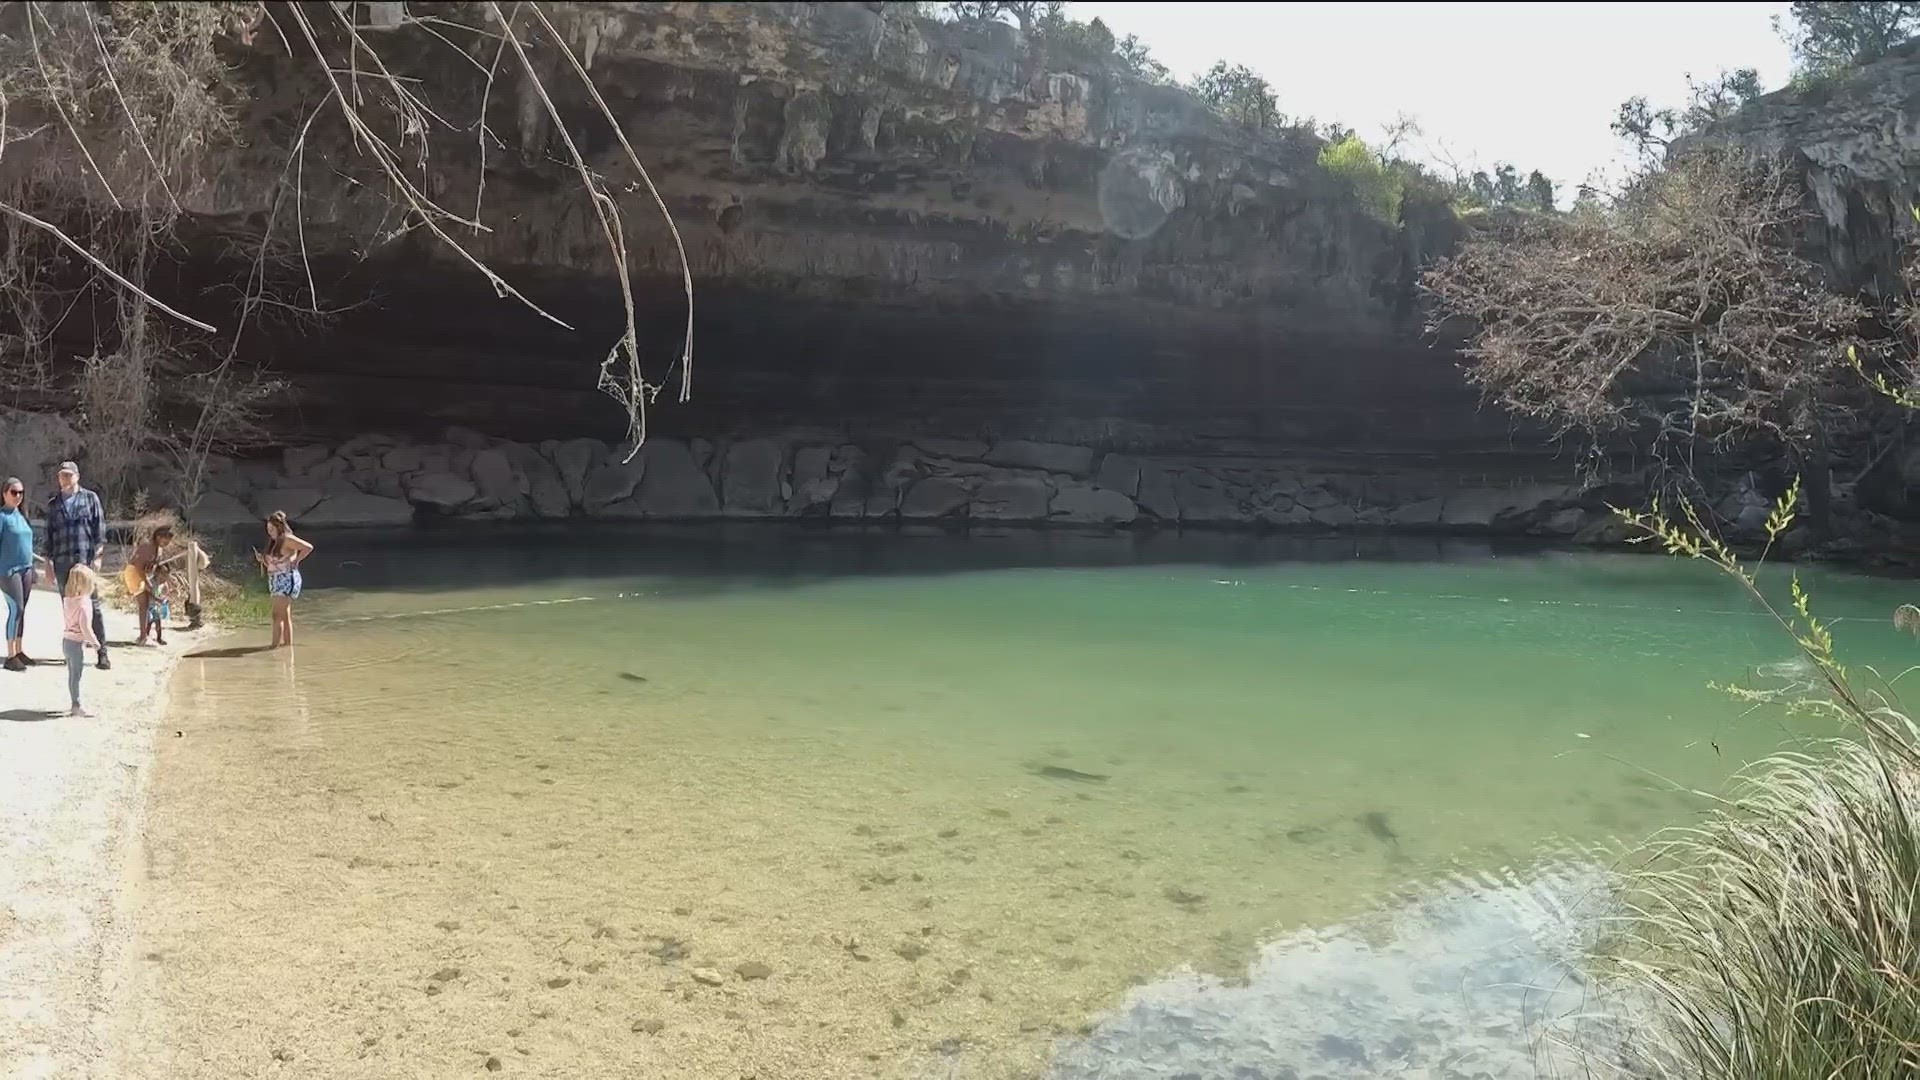 Central Texas is known for its great outdoors and places to swim. But the ongoing drought is impacting local swimming holes.